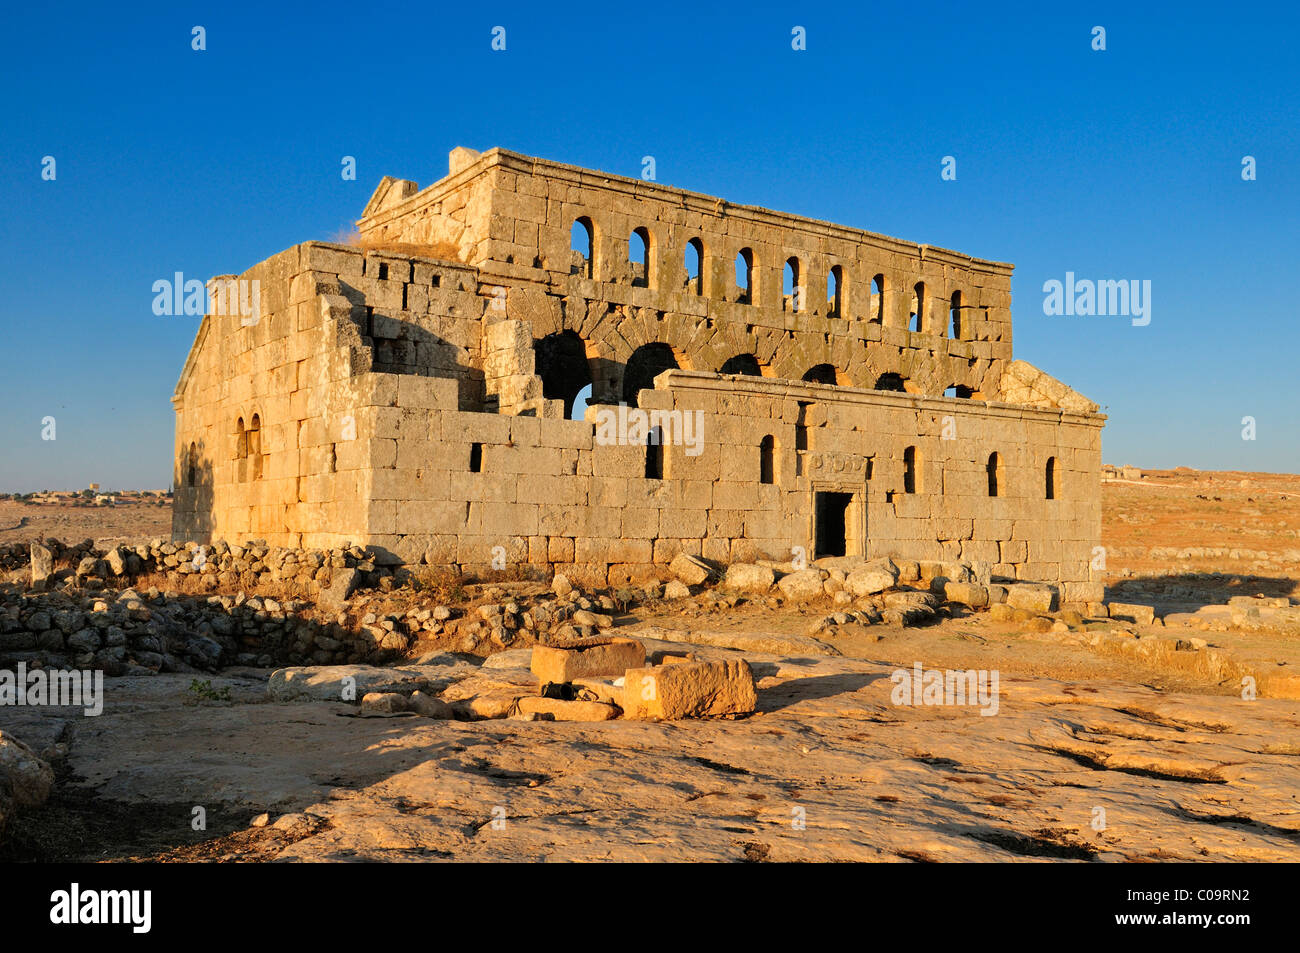 Ruin of the Byzantine church of Mshabak near Aleppo, Dead Cities, Syria, Middle East, West Asia Stock Photo